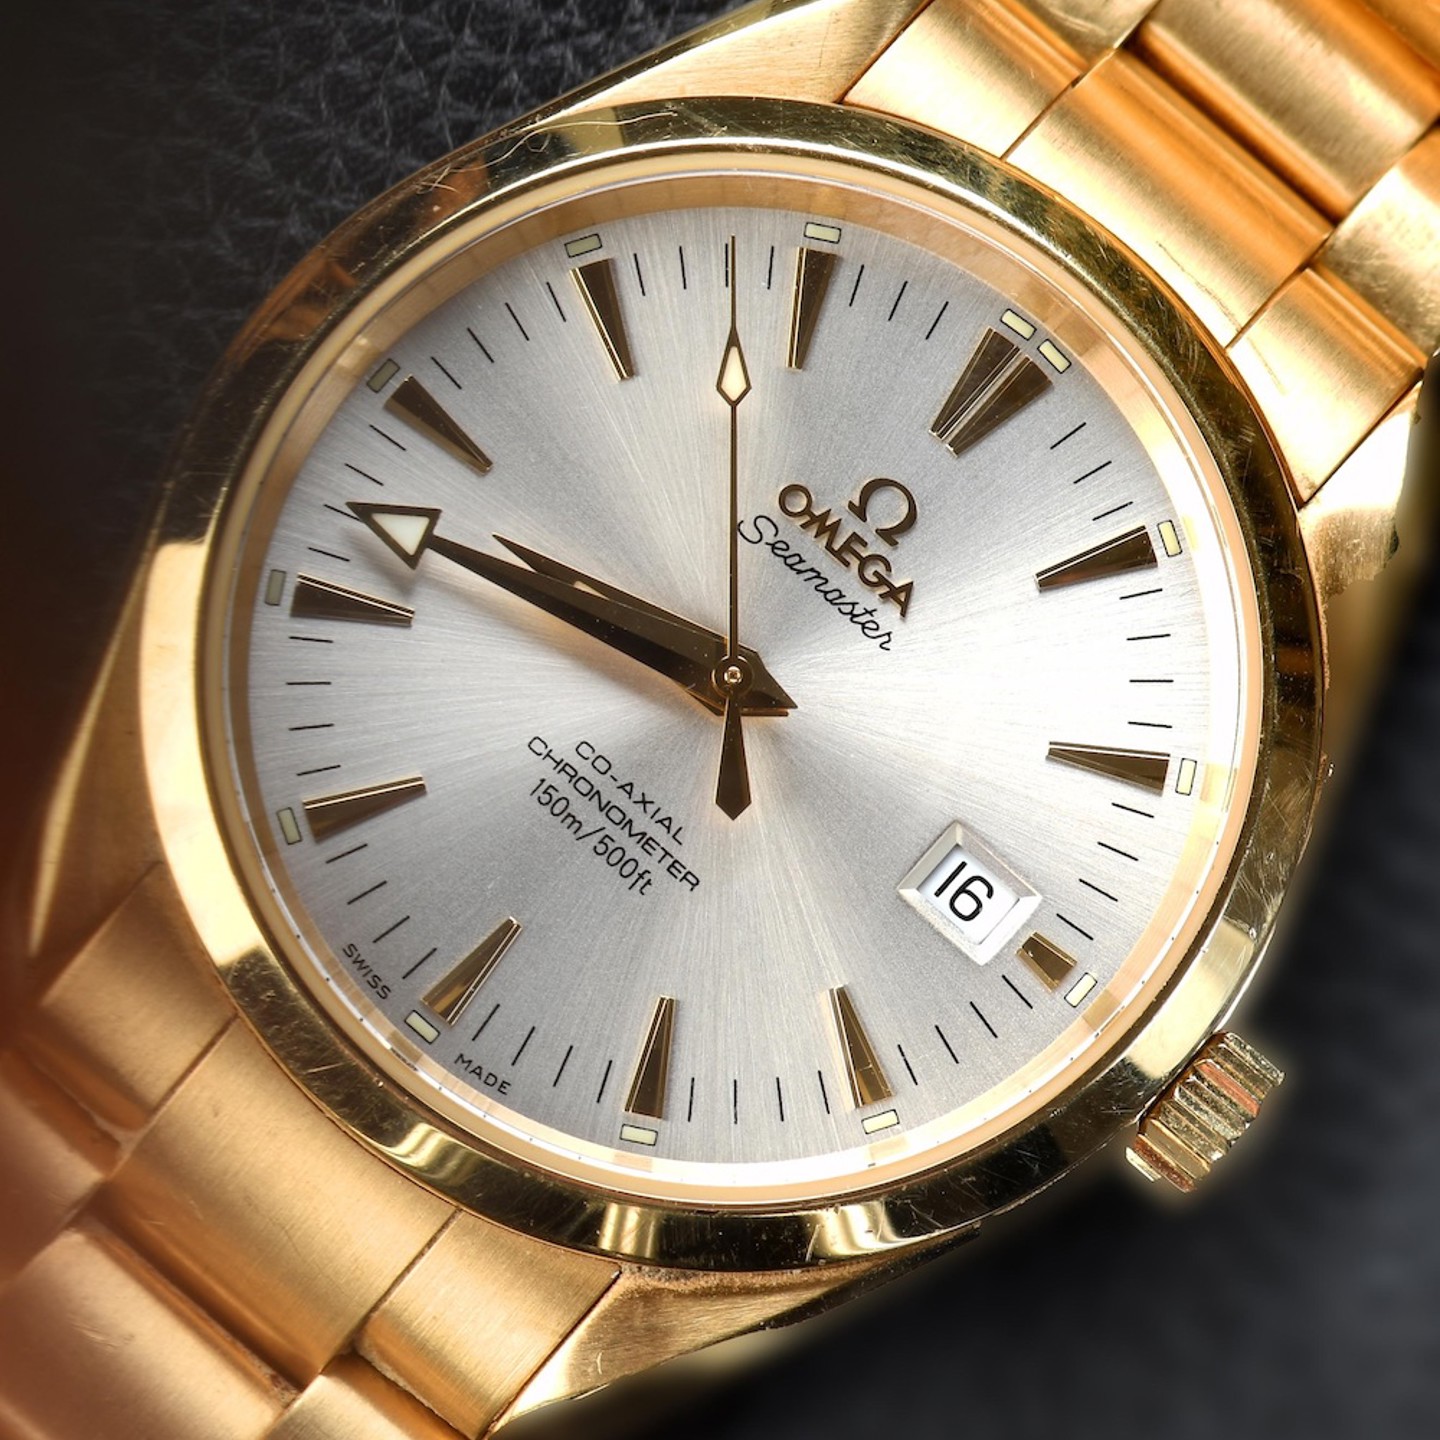 Omega Seamaster Aqua Terra Co Axial Chronometer 18Ct Gold Gentleman's Automatic Diver's Wristwatch. Sold For £7,900